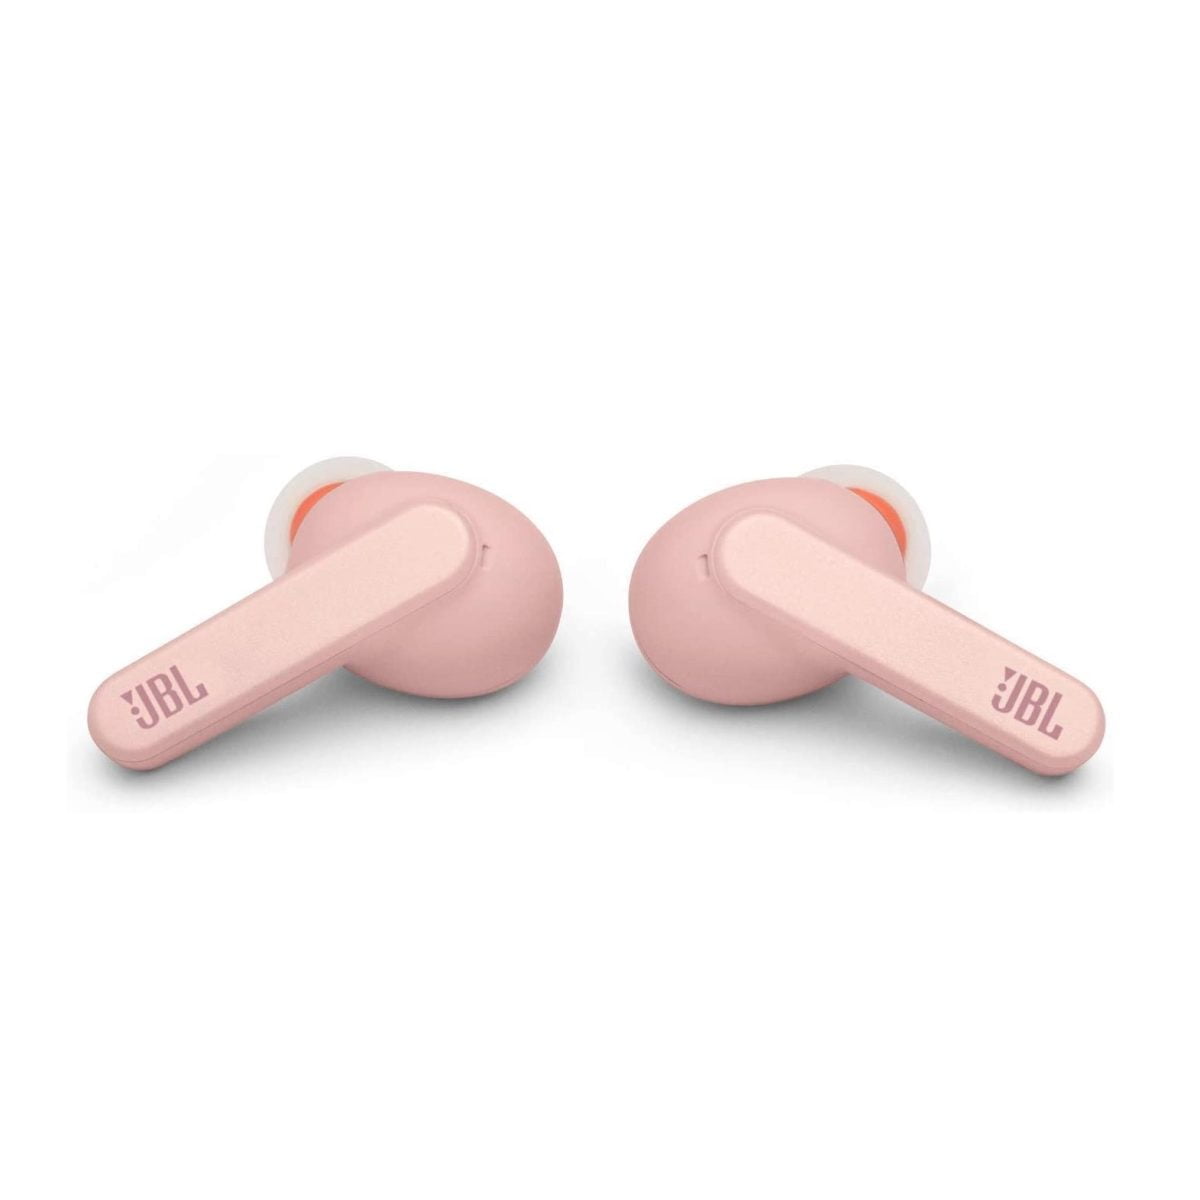 Jbl &Lt;H1&Gt;Jbl Live Pro Plus True Wireless Noise Cancelling Earbuds-Pink&Lt;/H1&Gt; Https://Www.youtube.com/Watch?V=Oan6Moxjv58 &Nbsp; The Best Audio Solution Not Matter The Device, Jbl Live Pro+ Tws Delivers An Immersive True Wireless Experience With Incredible Jbl Signature Sound. Let Smart Ambient Connect You To Your Environment, Or Focus On The Music With Adaptive Noise Cancelling. Then Switch Easily From Tunes To Group Calls With 4 Mics (2 Beamforming Mics Per Side) To Capture Your Voice With The Feeling Of Face-To-Face Conversation And A Third Mic For Environmental Noise Reduction. All Commands Are On The Earbuds, So You Can Manage Music And Calls With Your Finger Only. Jbl Earbuds Jbl Live Pro Plus Noise Cancelling Earbuds-Pink